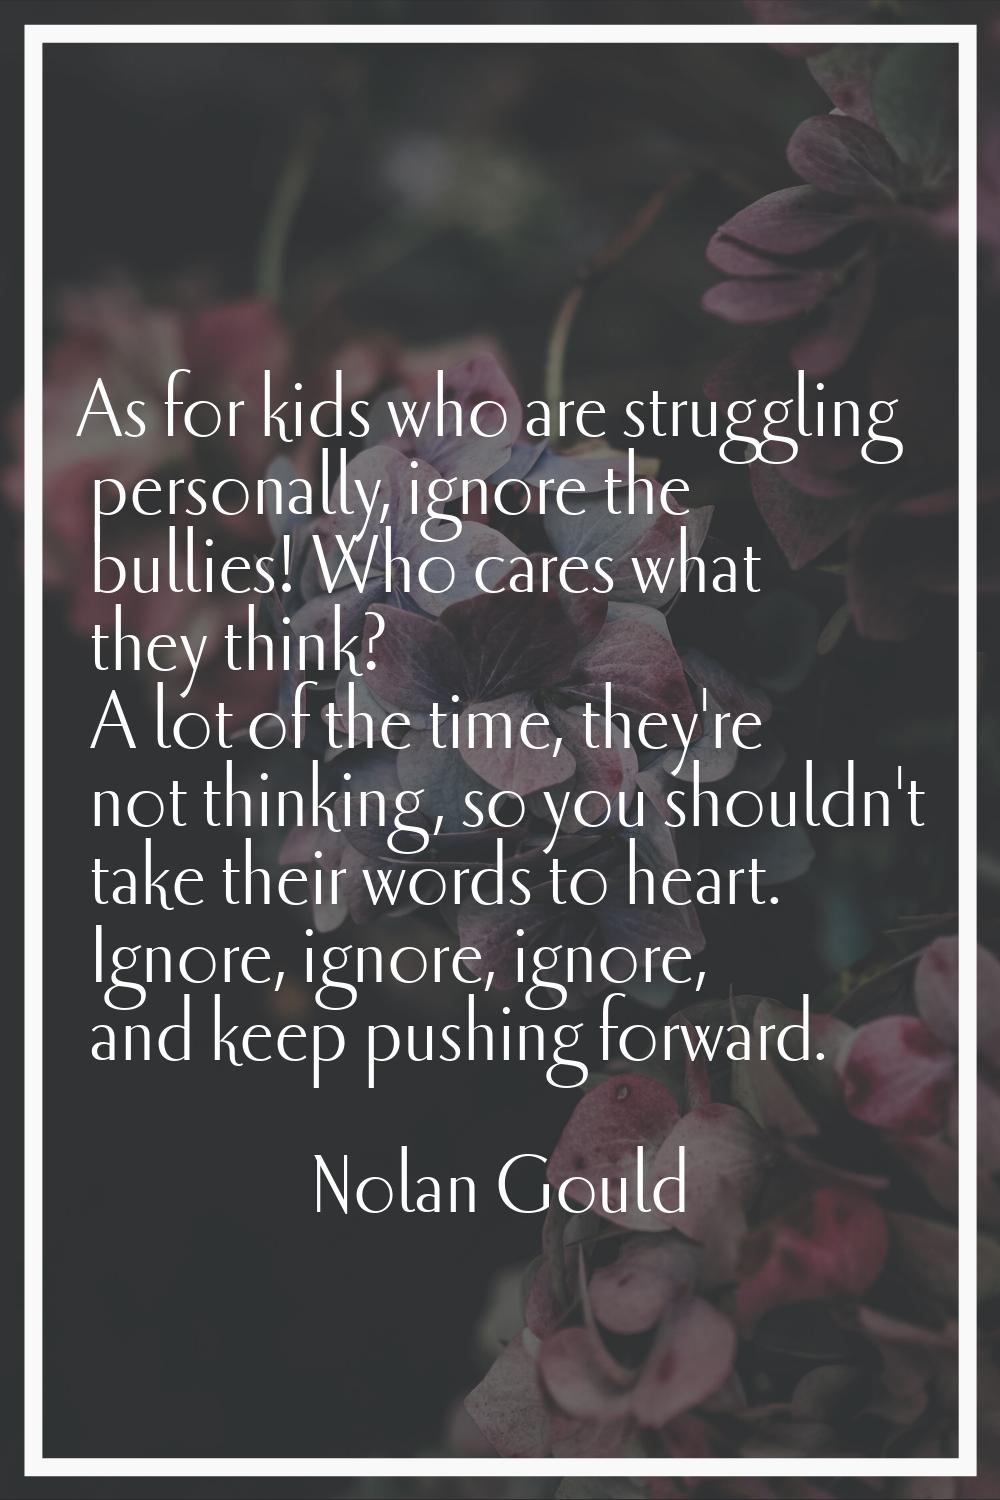 As for kids who are struggling personally, ignore the bullies! Who cares what they think? A lot of 